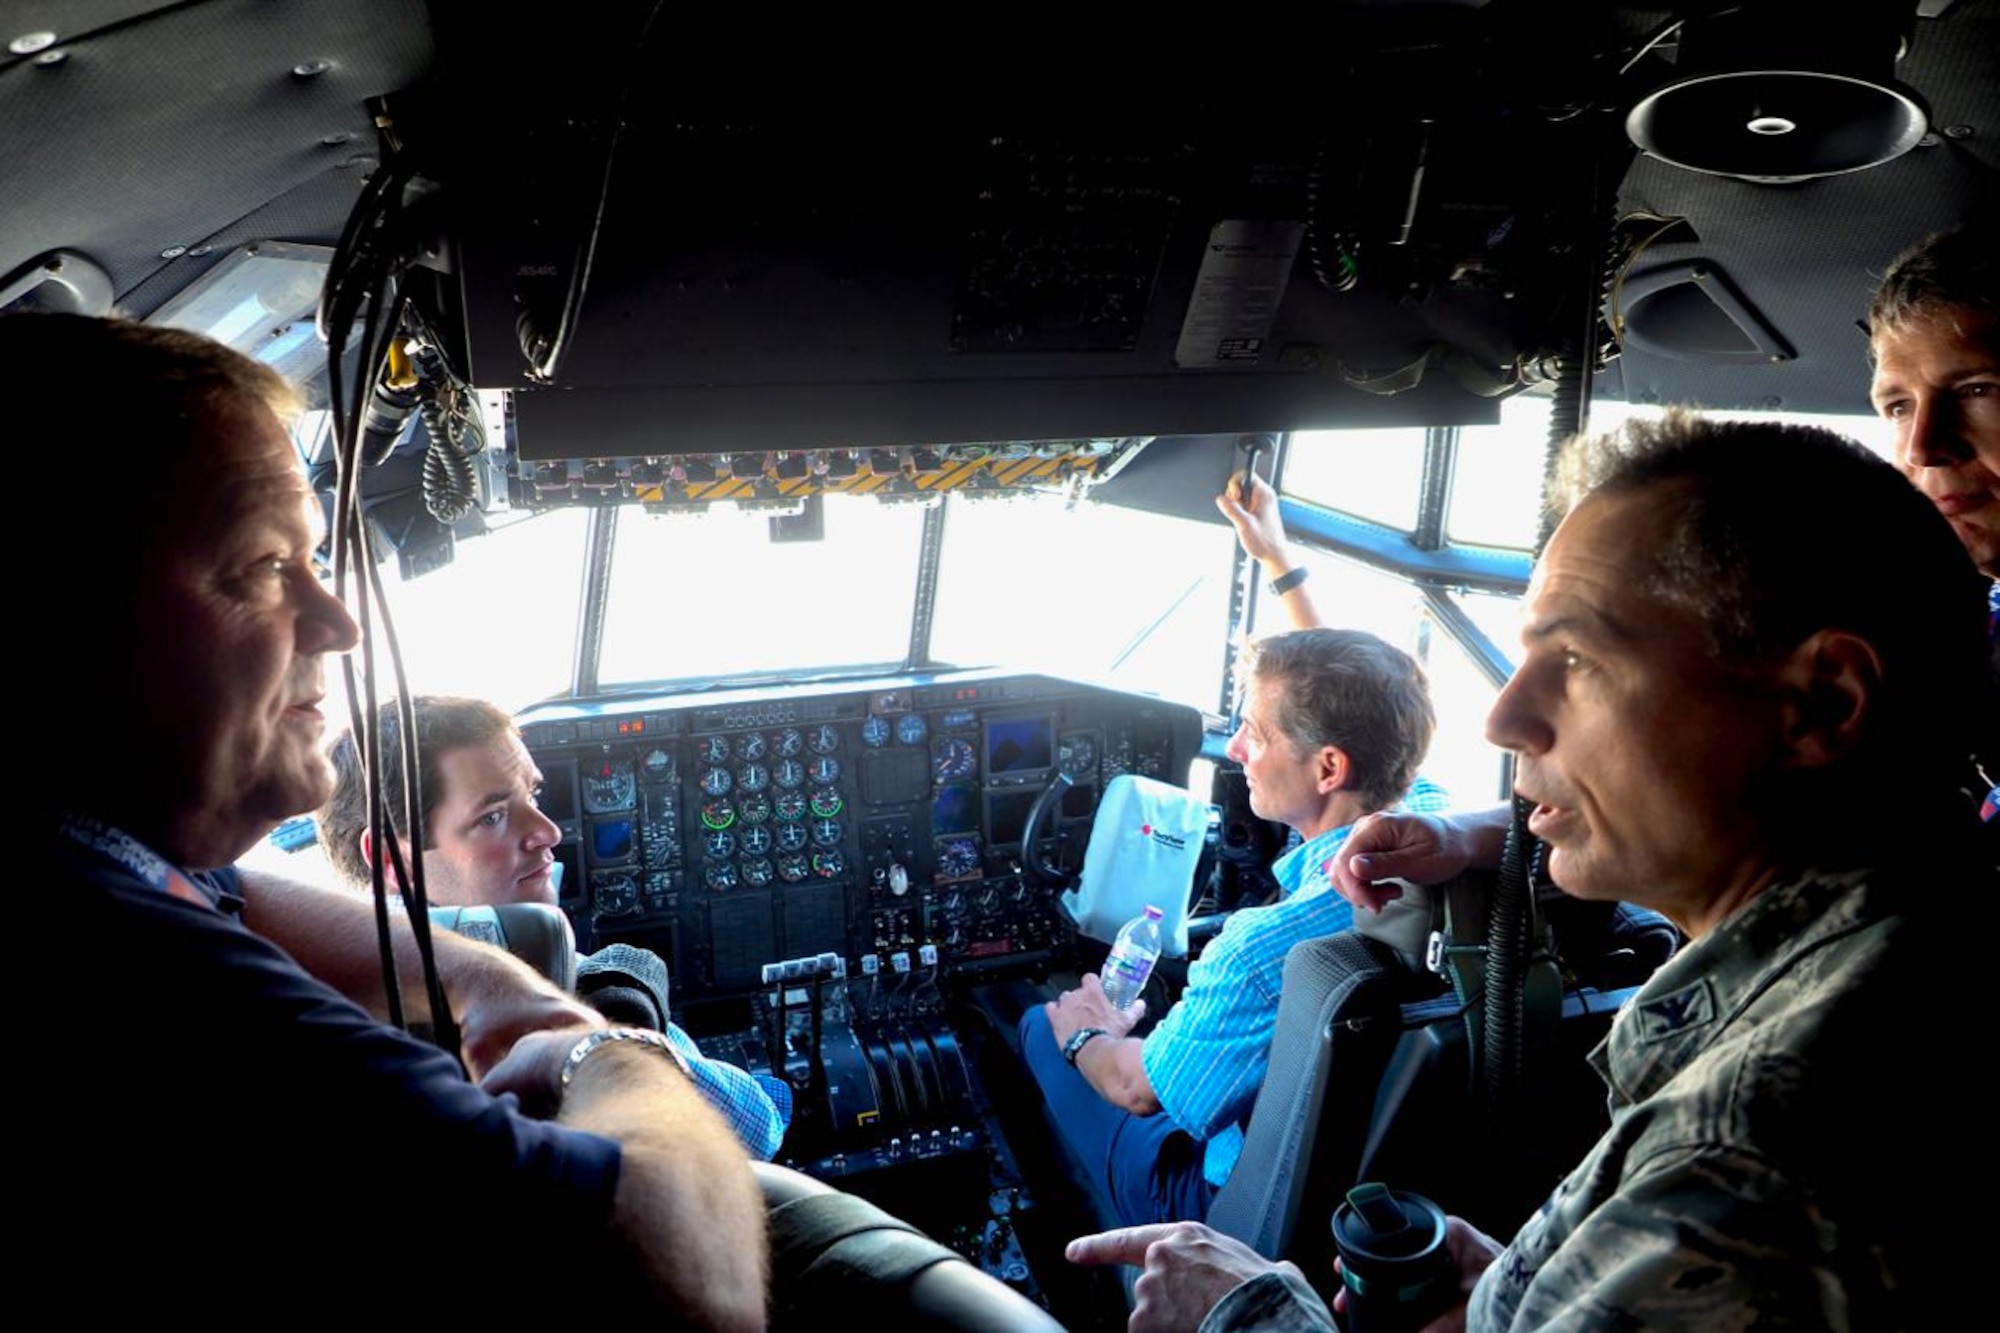 Col. Tony Polashek (right) 934th Airlift Wing commander, talks with Honorary Commanders in the cockpit of a C-130.
(Air Force Photo/Paul Zadach)